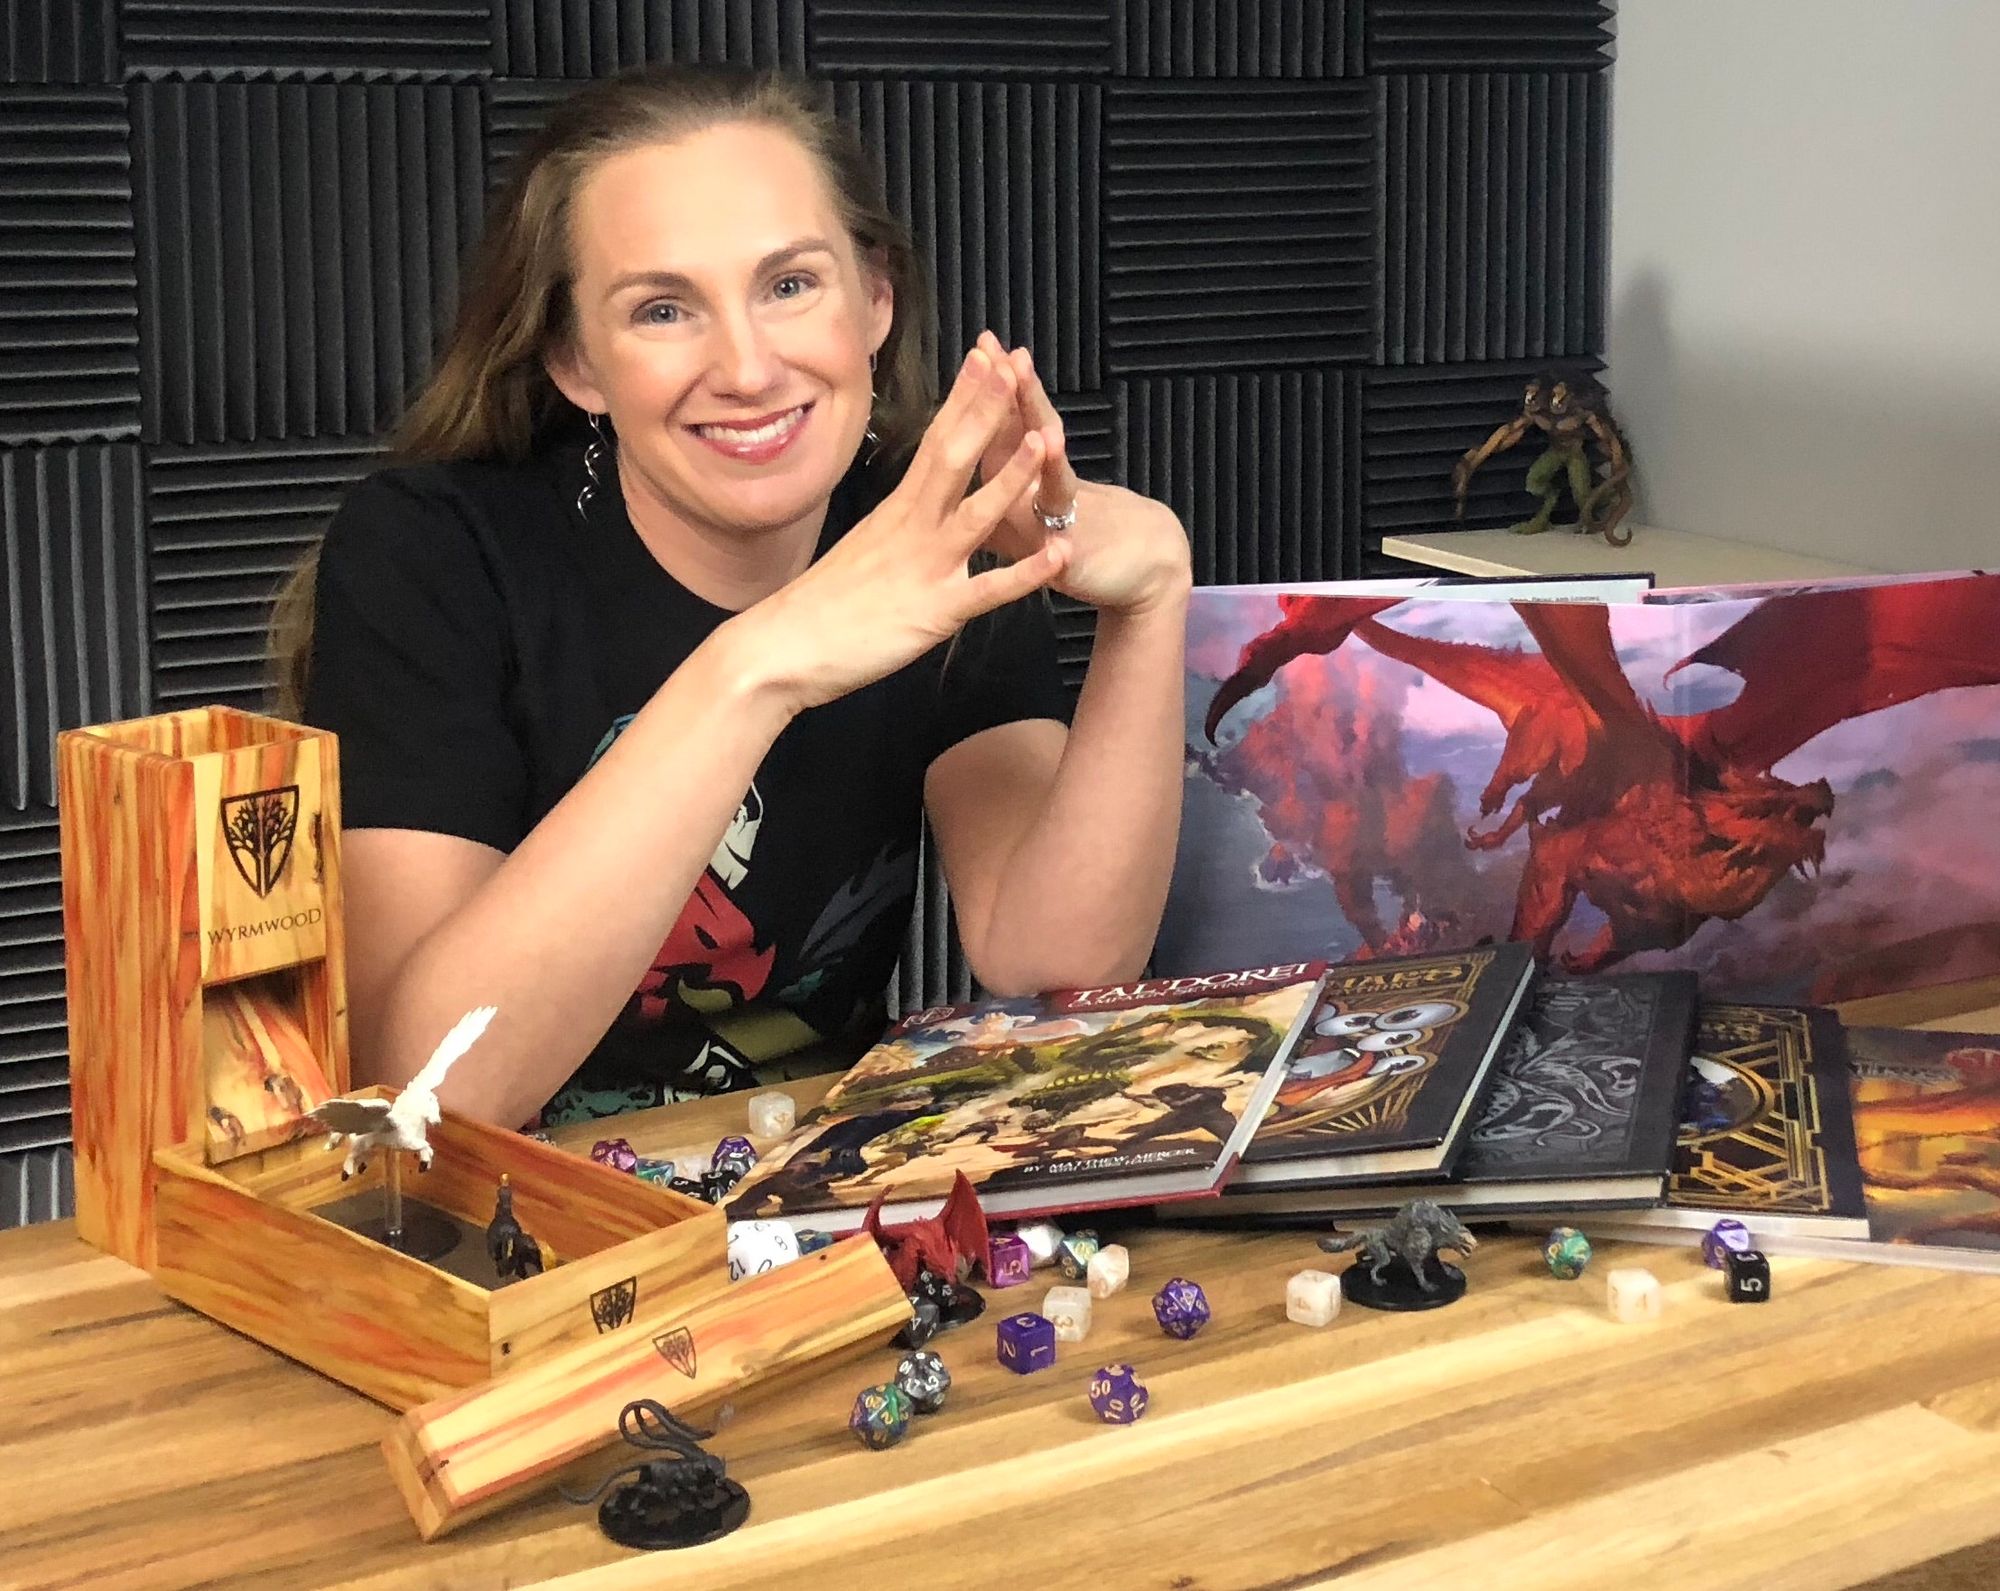 Dungeons and Dragons and Therapy: An Interview With Dr. Megan Connell